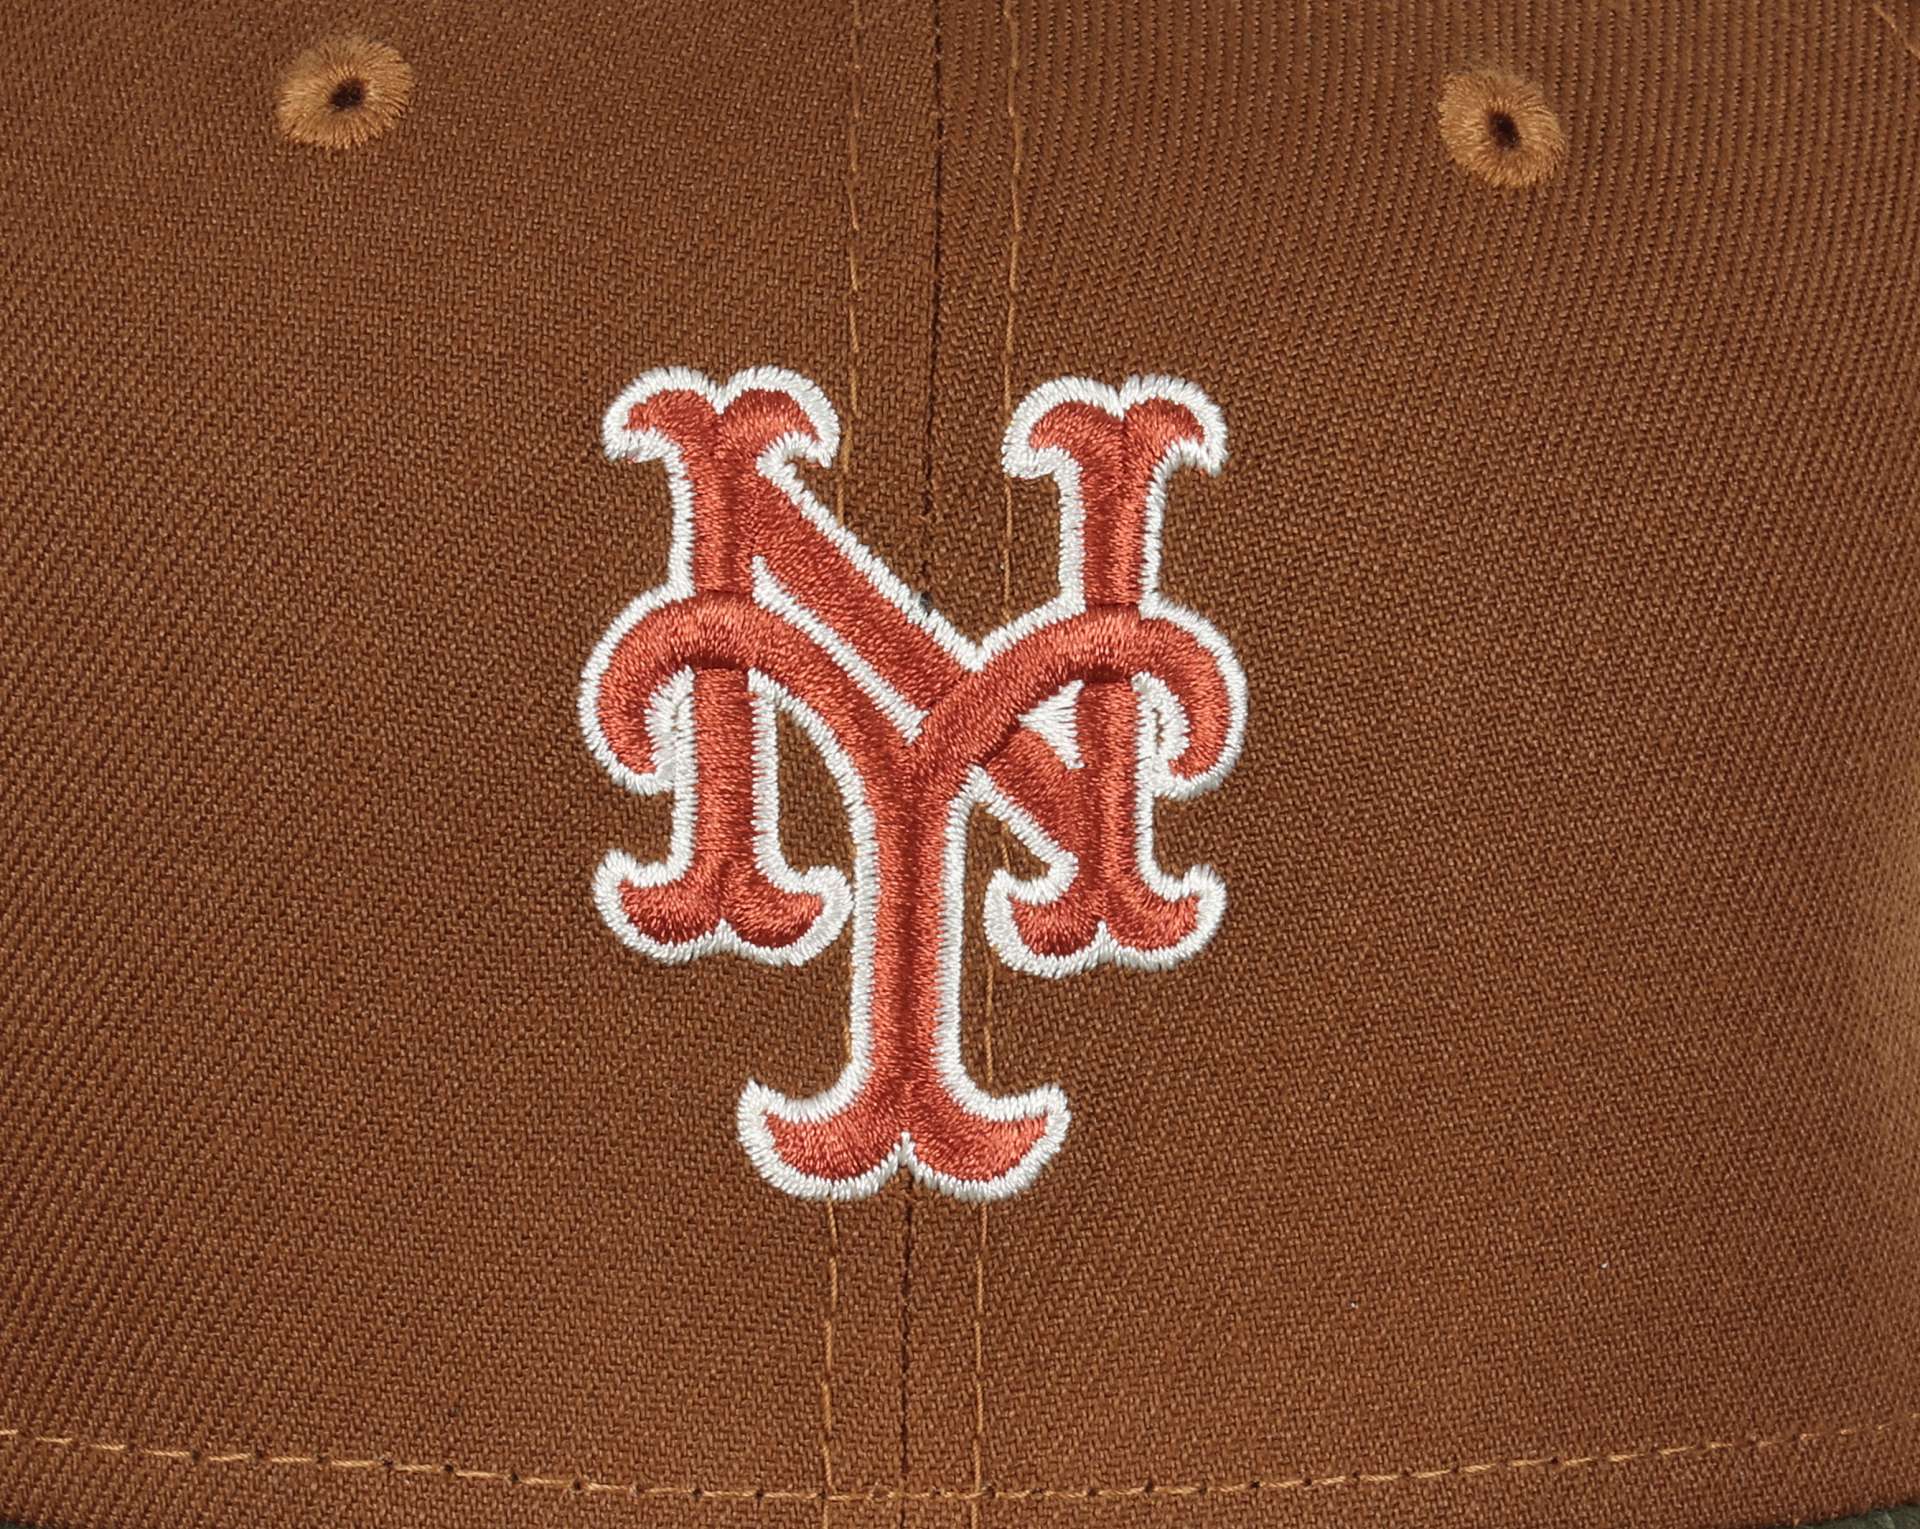 New York Mets MLB Cooperstown Subway Series Sidepatch Toasted Peanut 59Fifty Basecap New Era